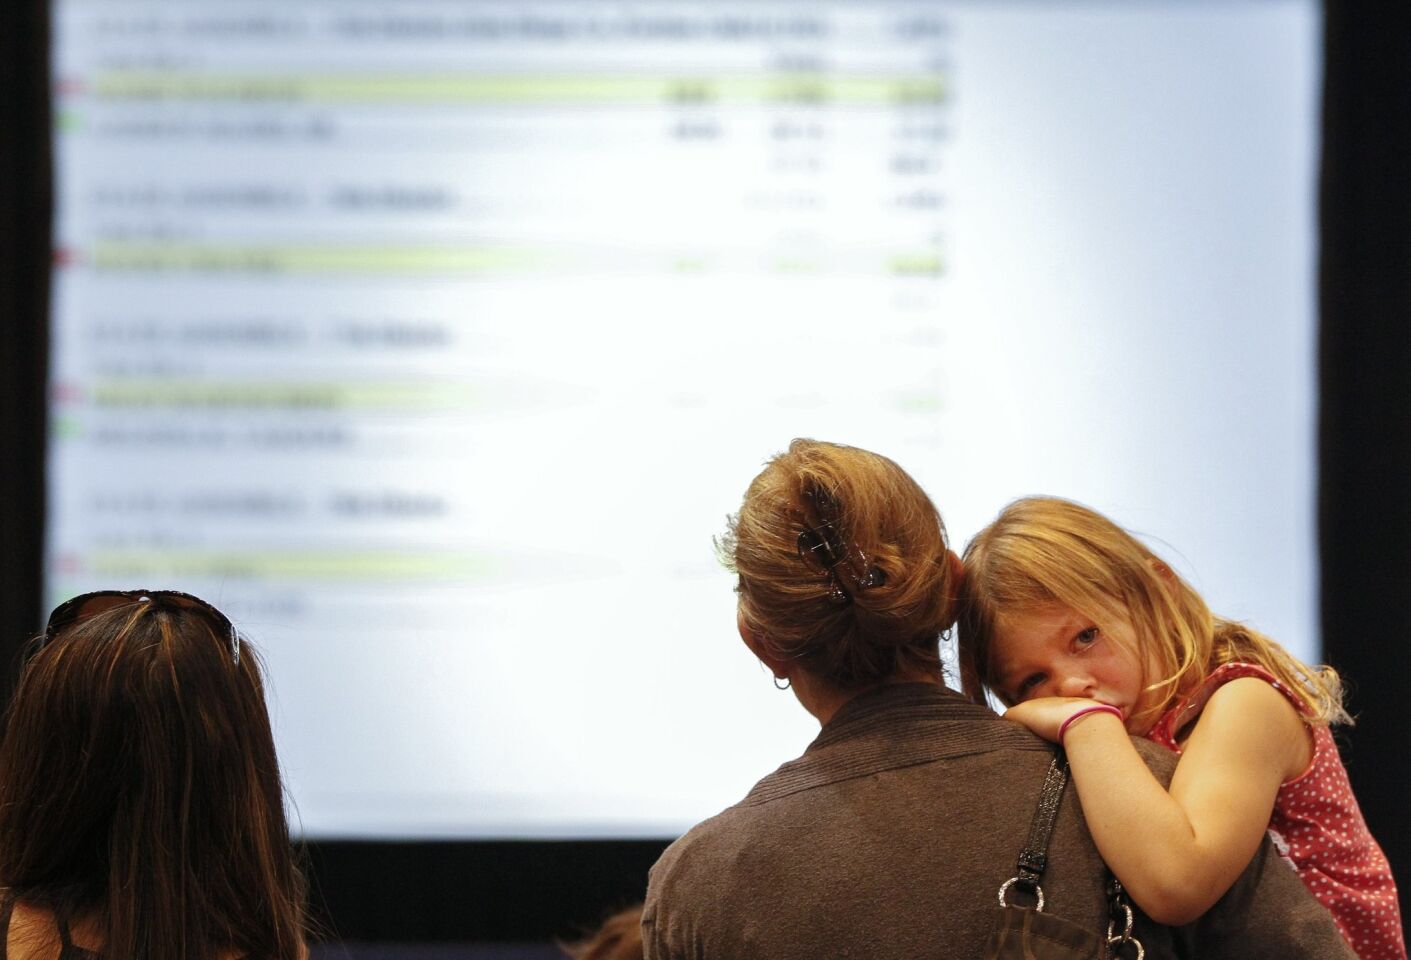 Four-year-old Myla Garcia rest her head on her mother Brooke Garcia's shoulder as she looks for assembly candidate Todd Gloria's results, who Garcia is a supporter of, on a screen at Golden Hall.